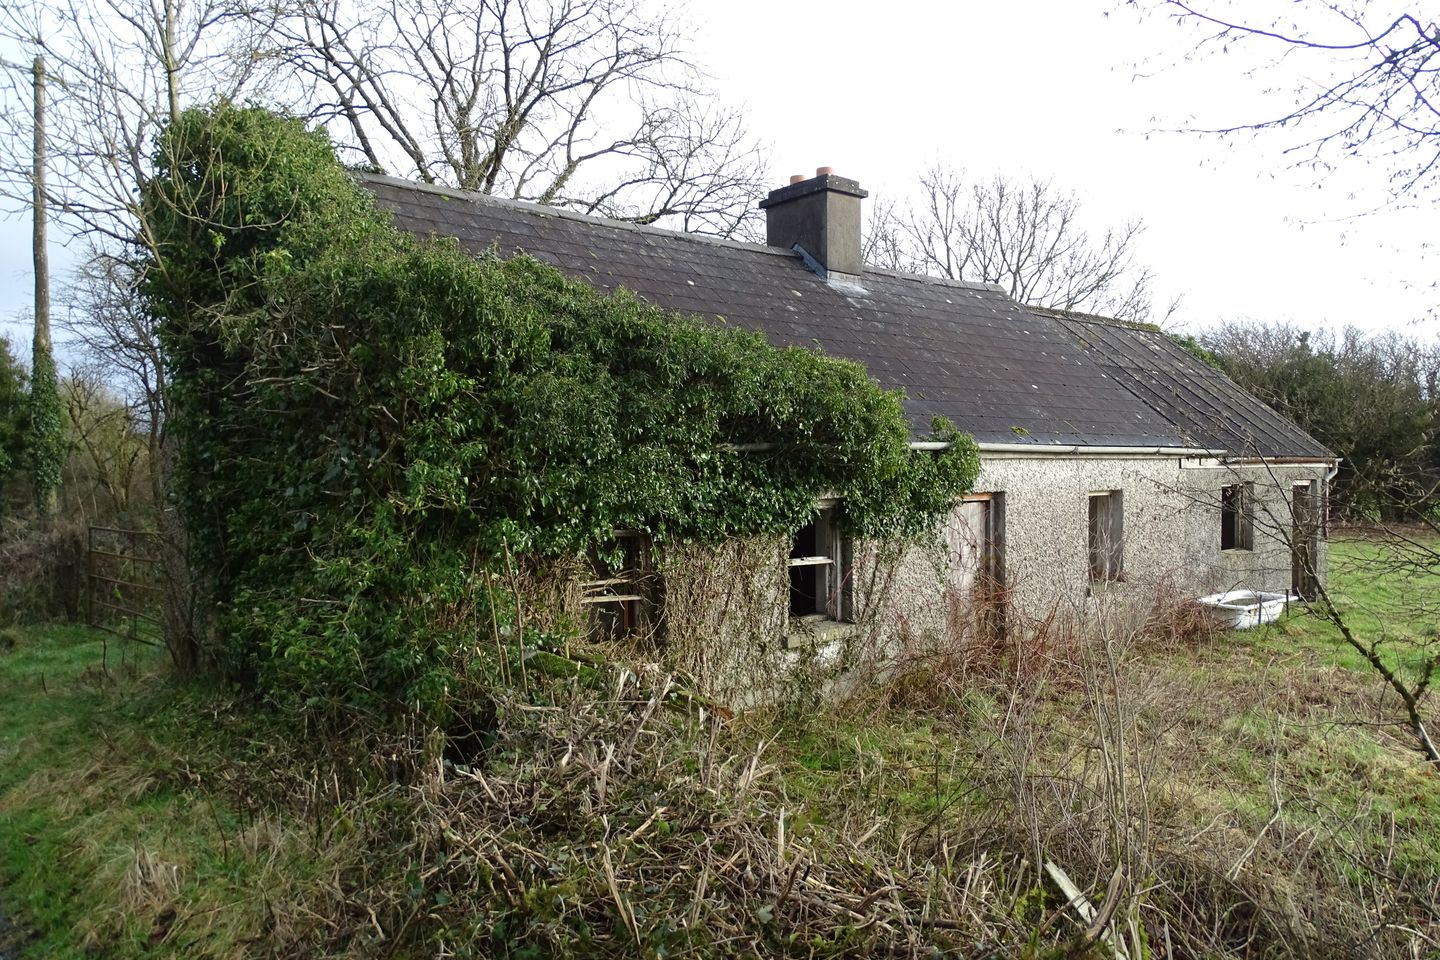 Keelogue, Borris-in-Ossory, Co. Laois